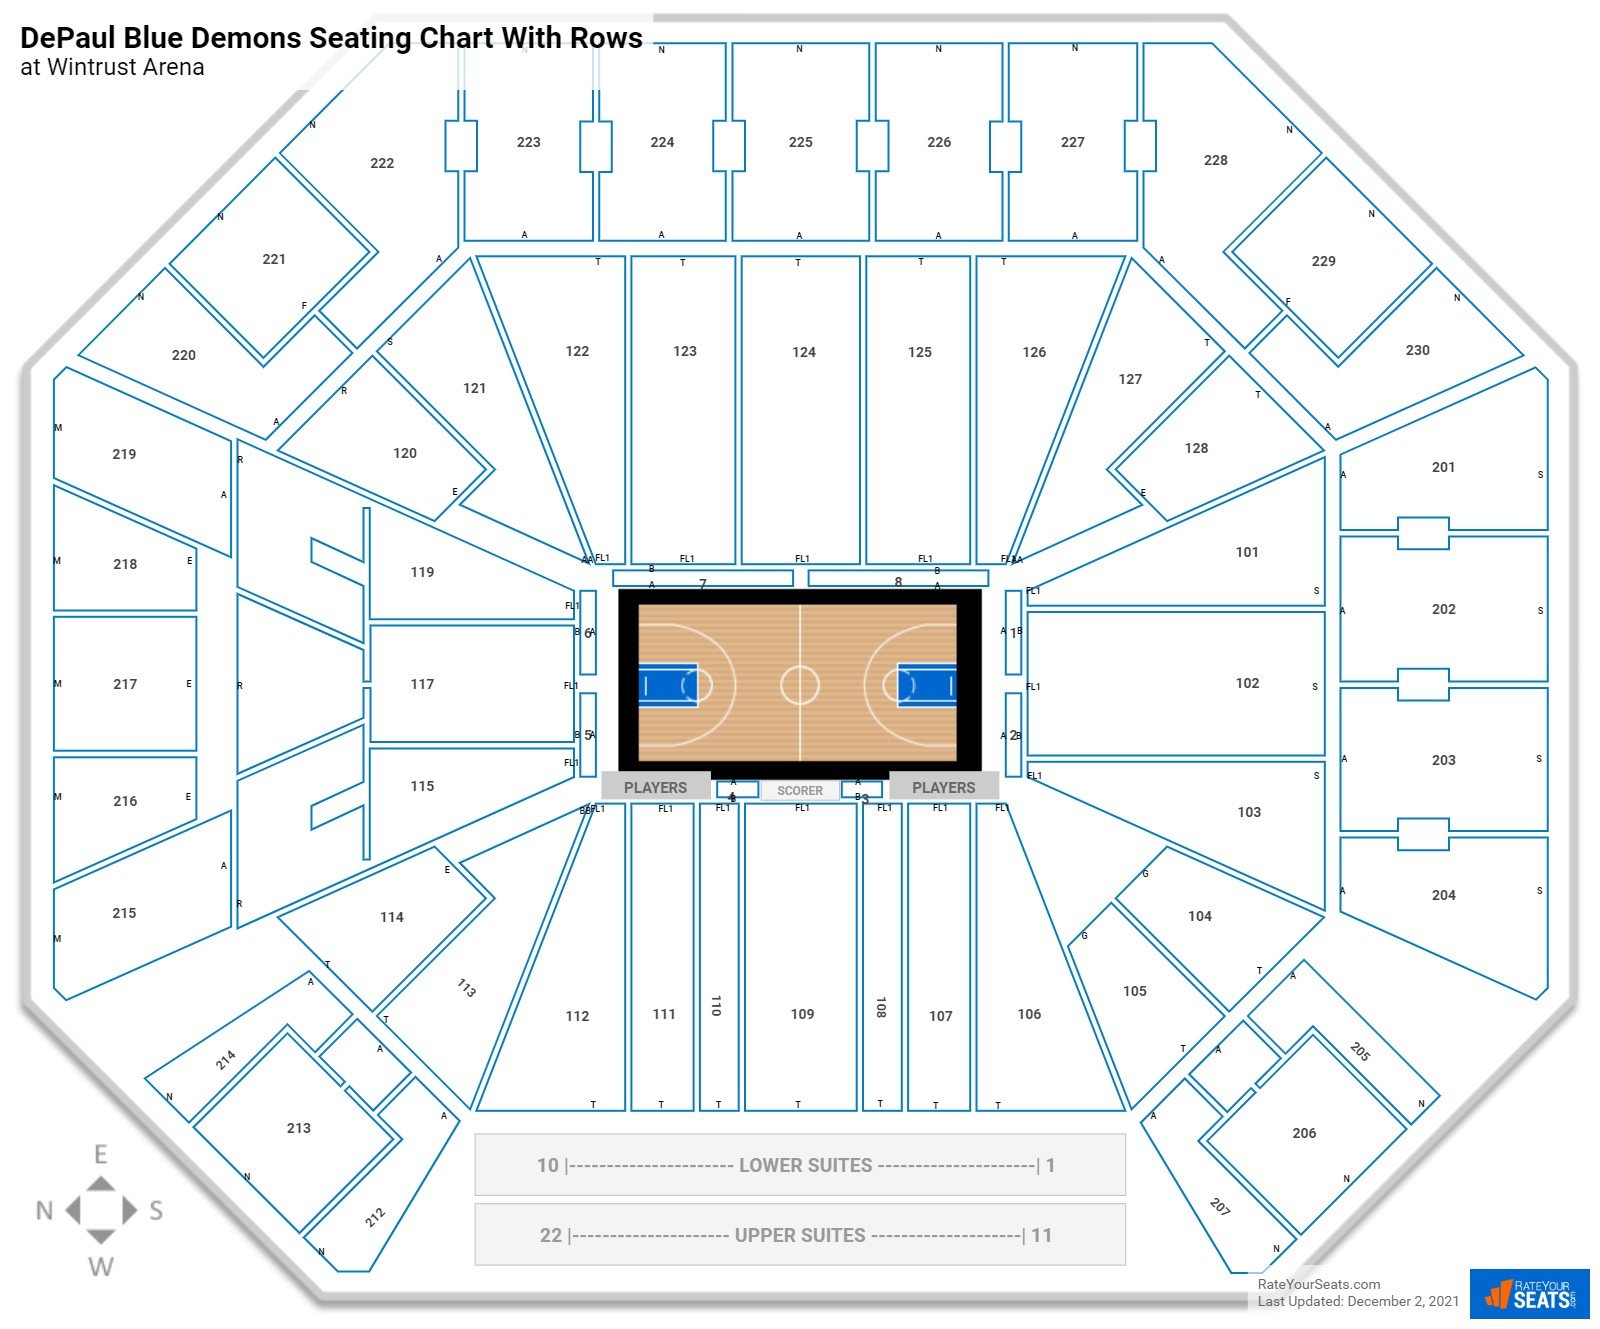 Wintrust Arena seating chart with row numbers